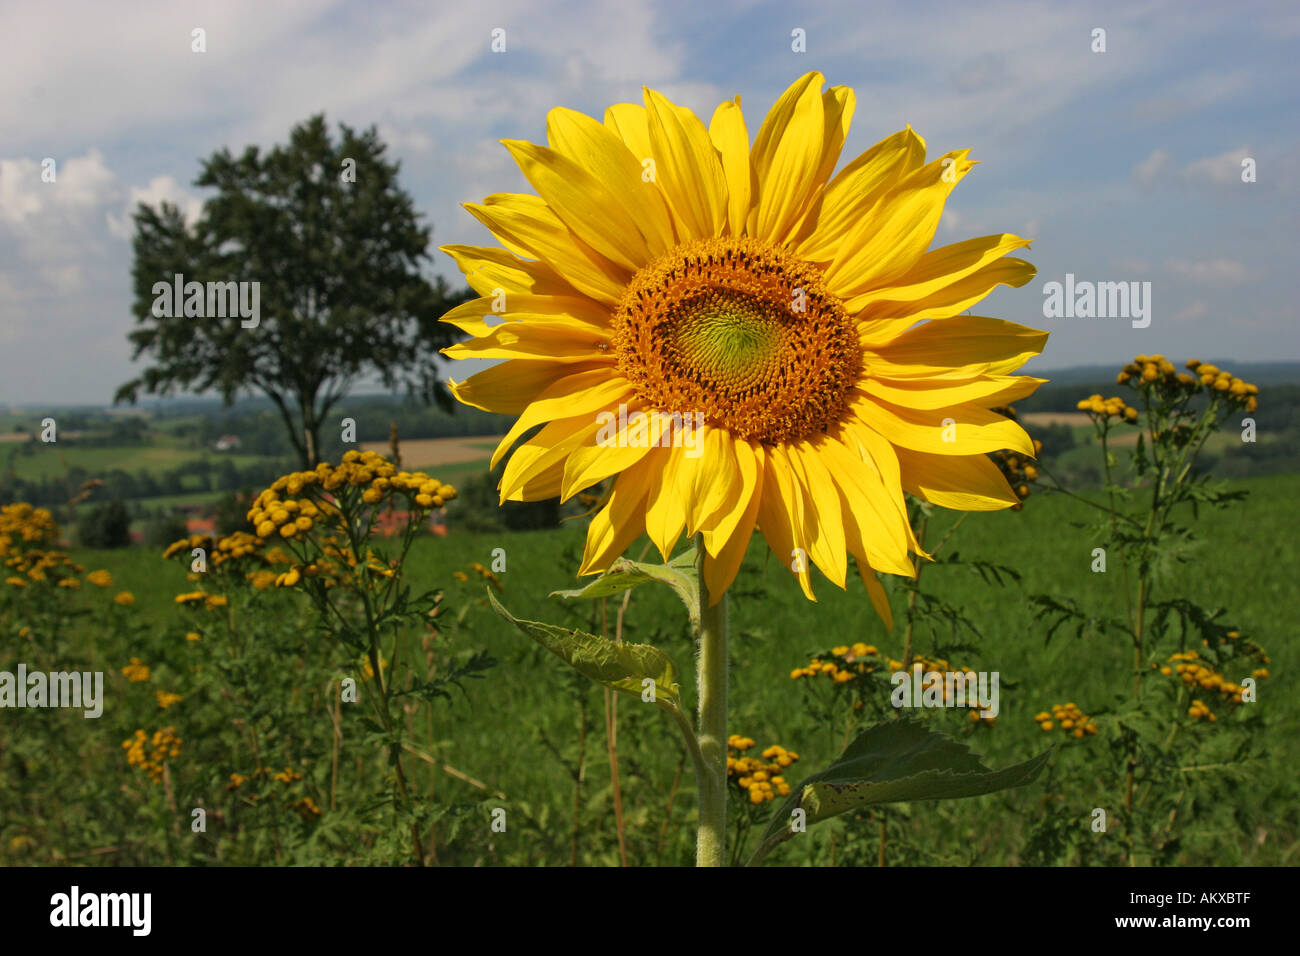 Blooming sunflower Helianthus annuus in front of richly structured landscape with single tree Stock Photo